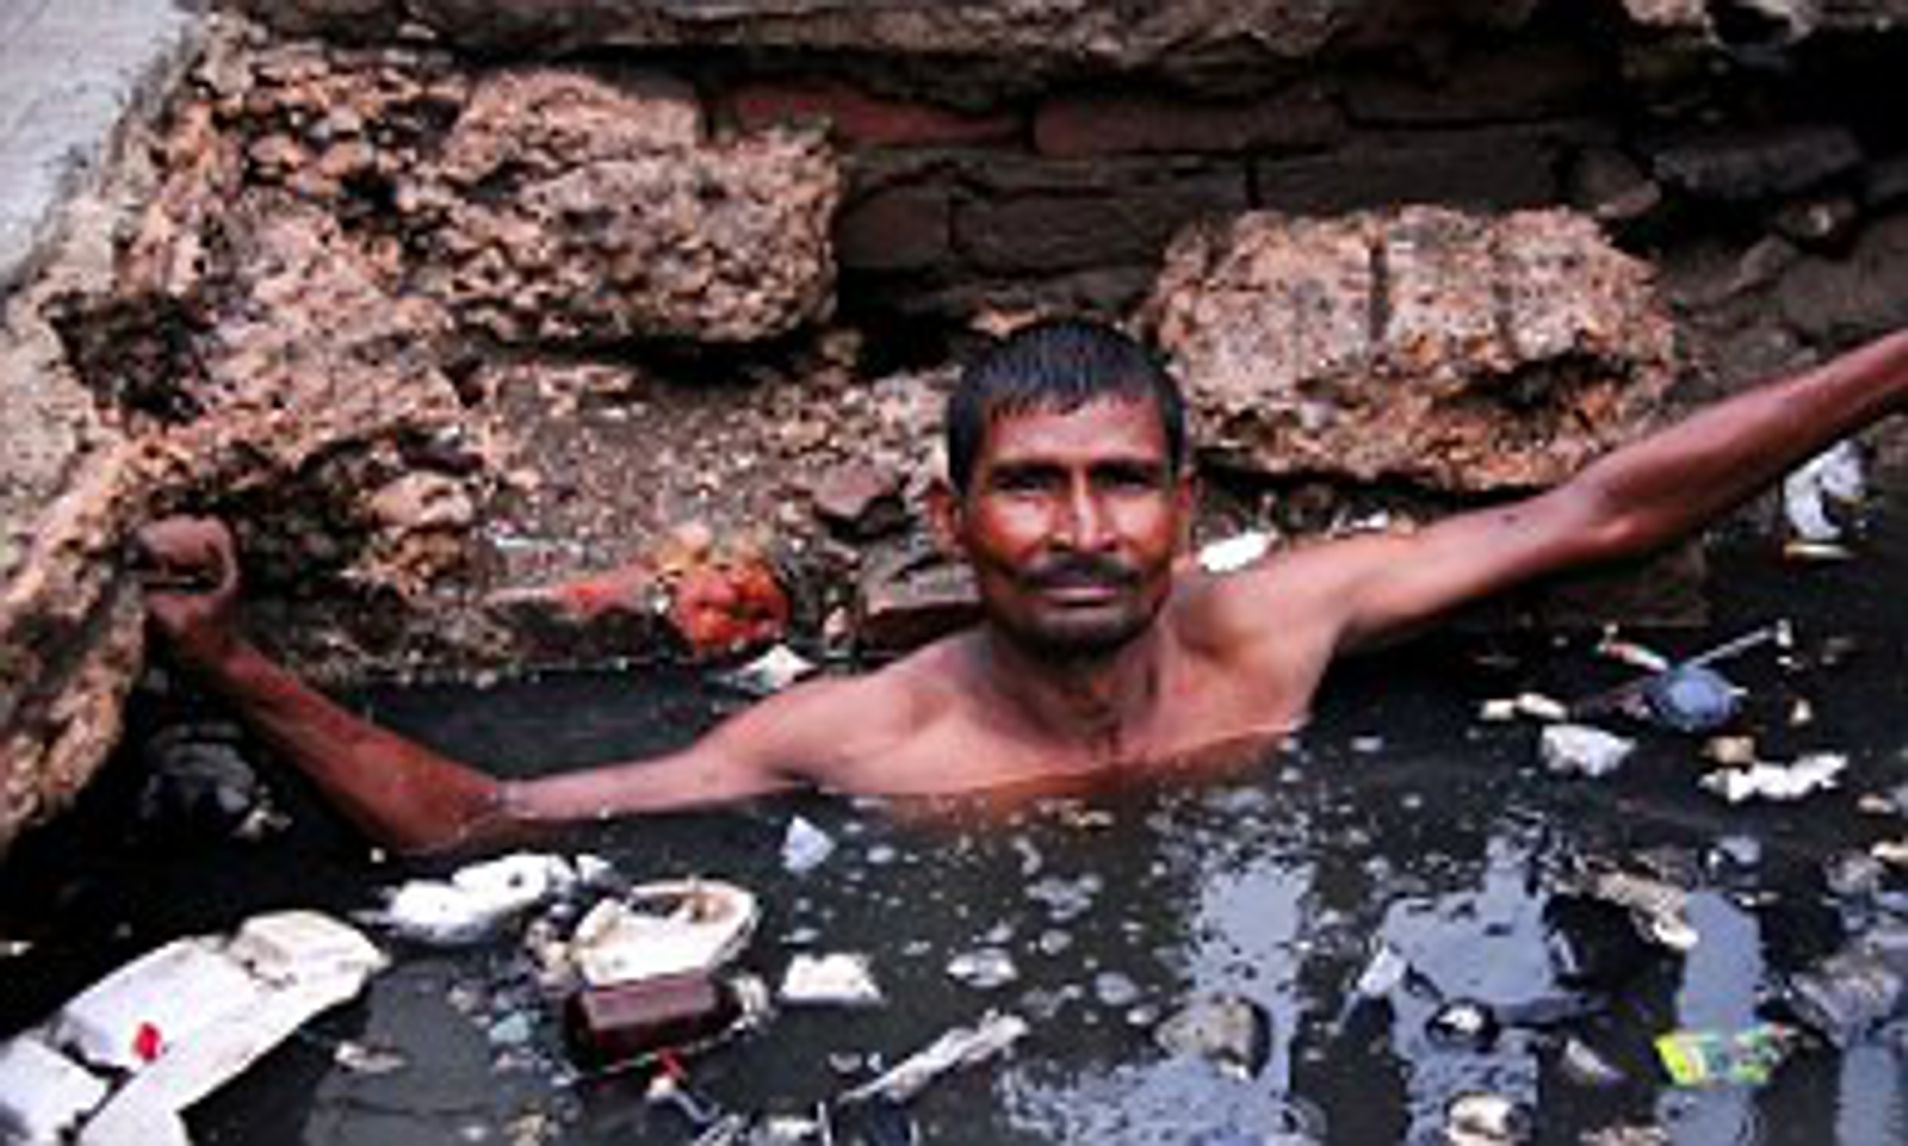 And you thought you had a bad job: Indian 'sewer diver' paid just £3.50 a  day (plus a bottle of booze) to unclog Delhi's drains | Daily Mail Online